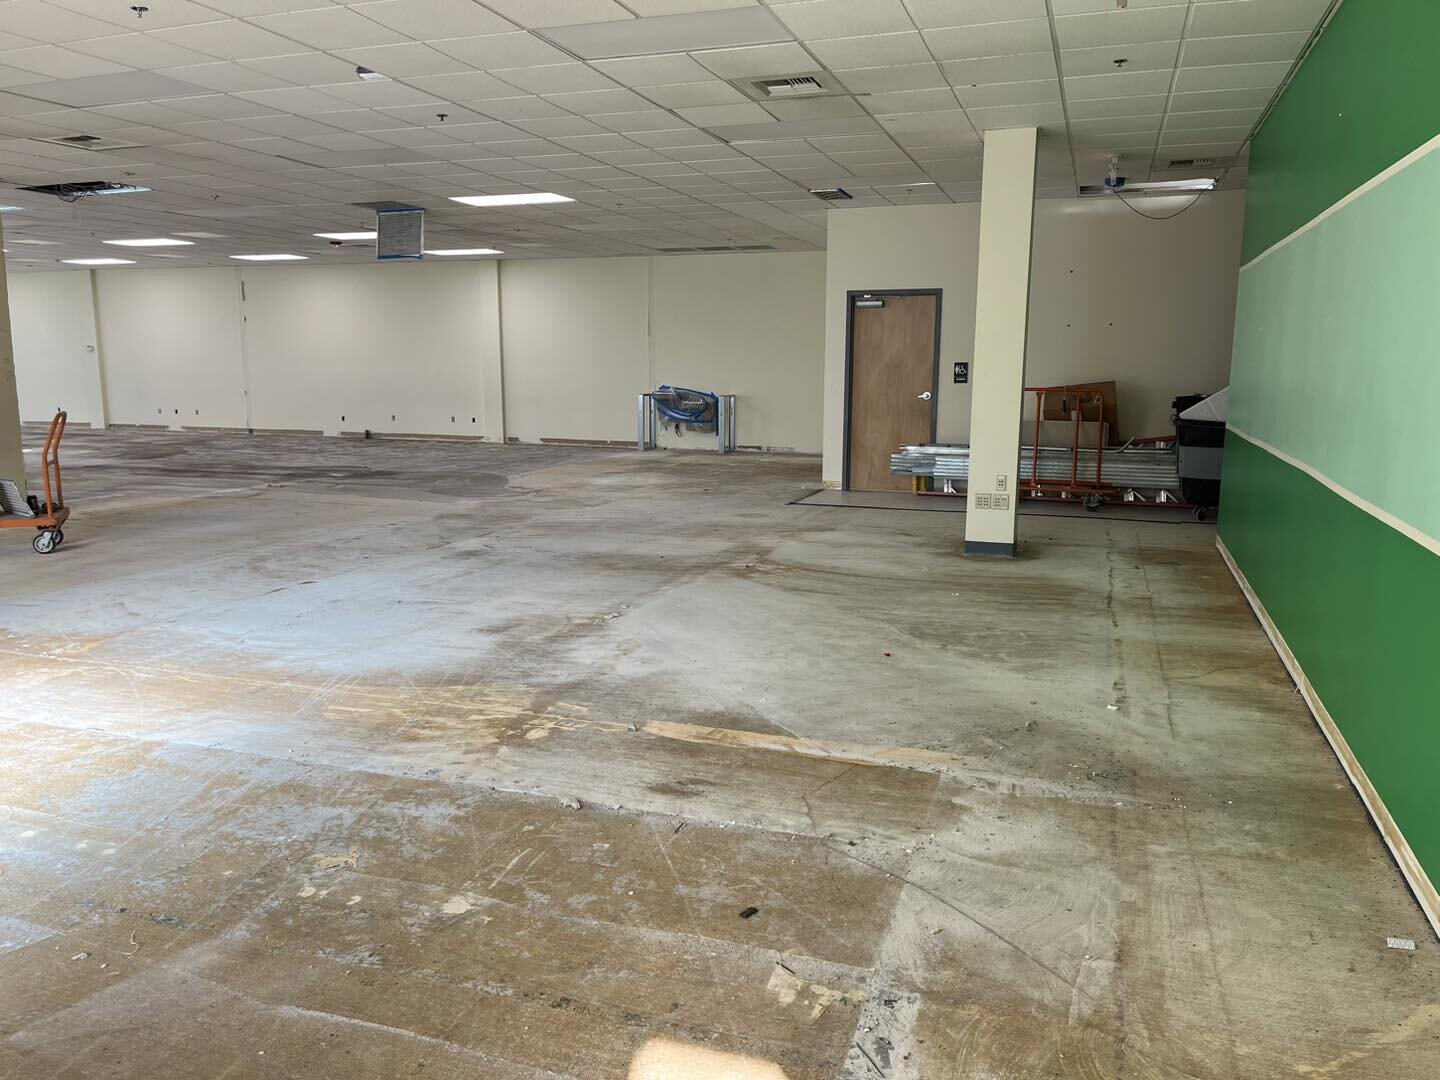 Demolition is complete, we love all of the natural light. Construction is scheduled to be finished 3/1/2024, with classes starting soon after!